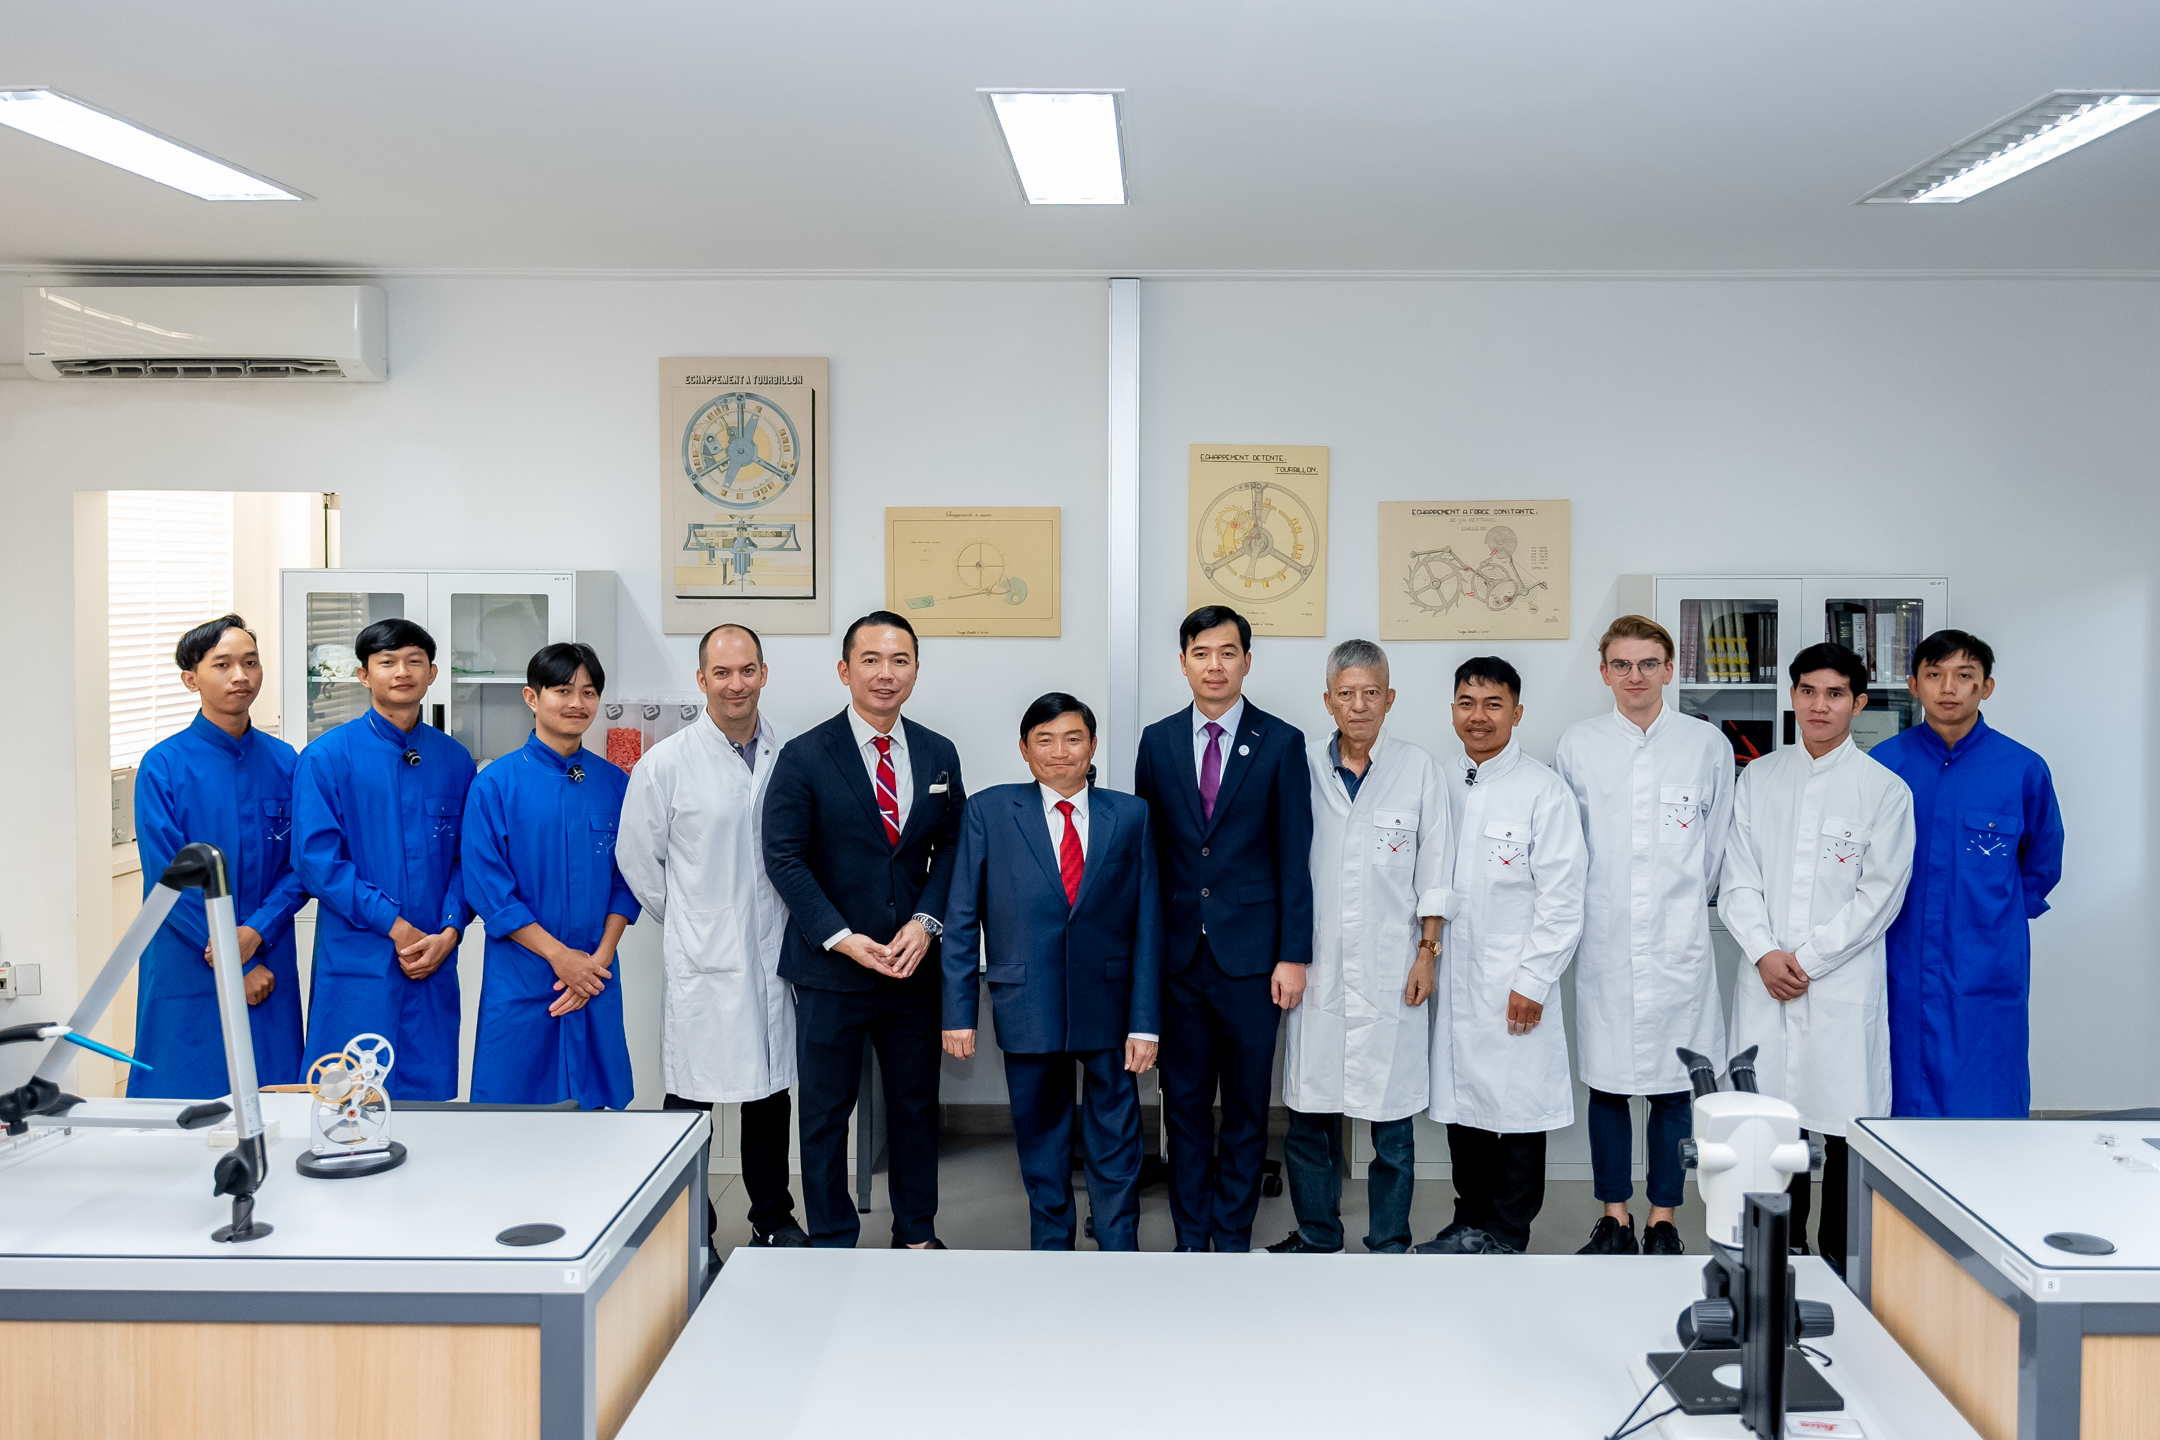 H.E. Heng Sour, Minister of Labour and Vocational Training, explored the curriculum at Prince Horology, which imparts the art of Swiss watchmaking techniques to Cambodian students.